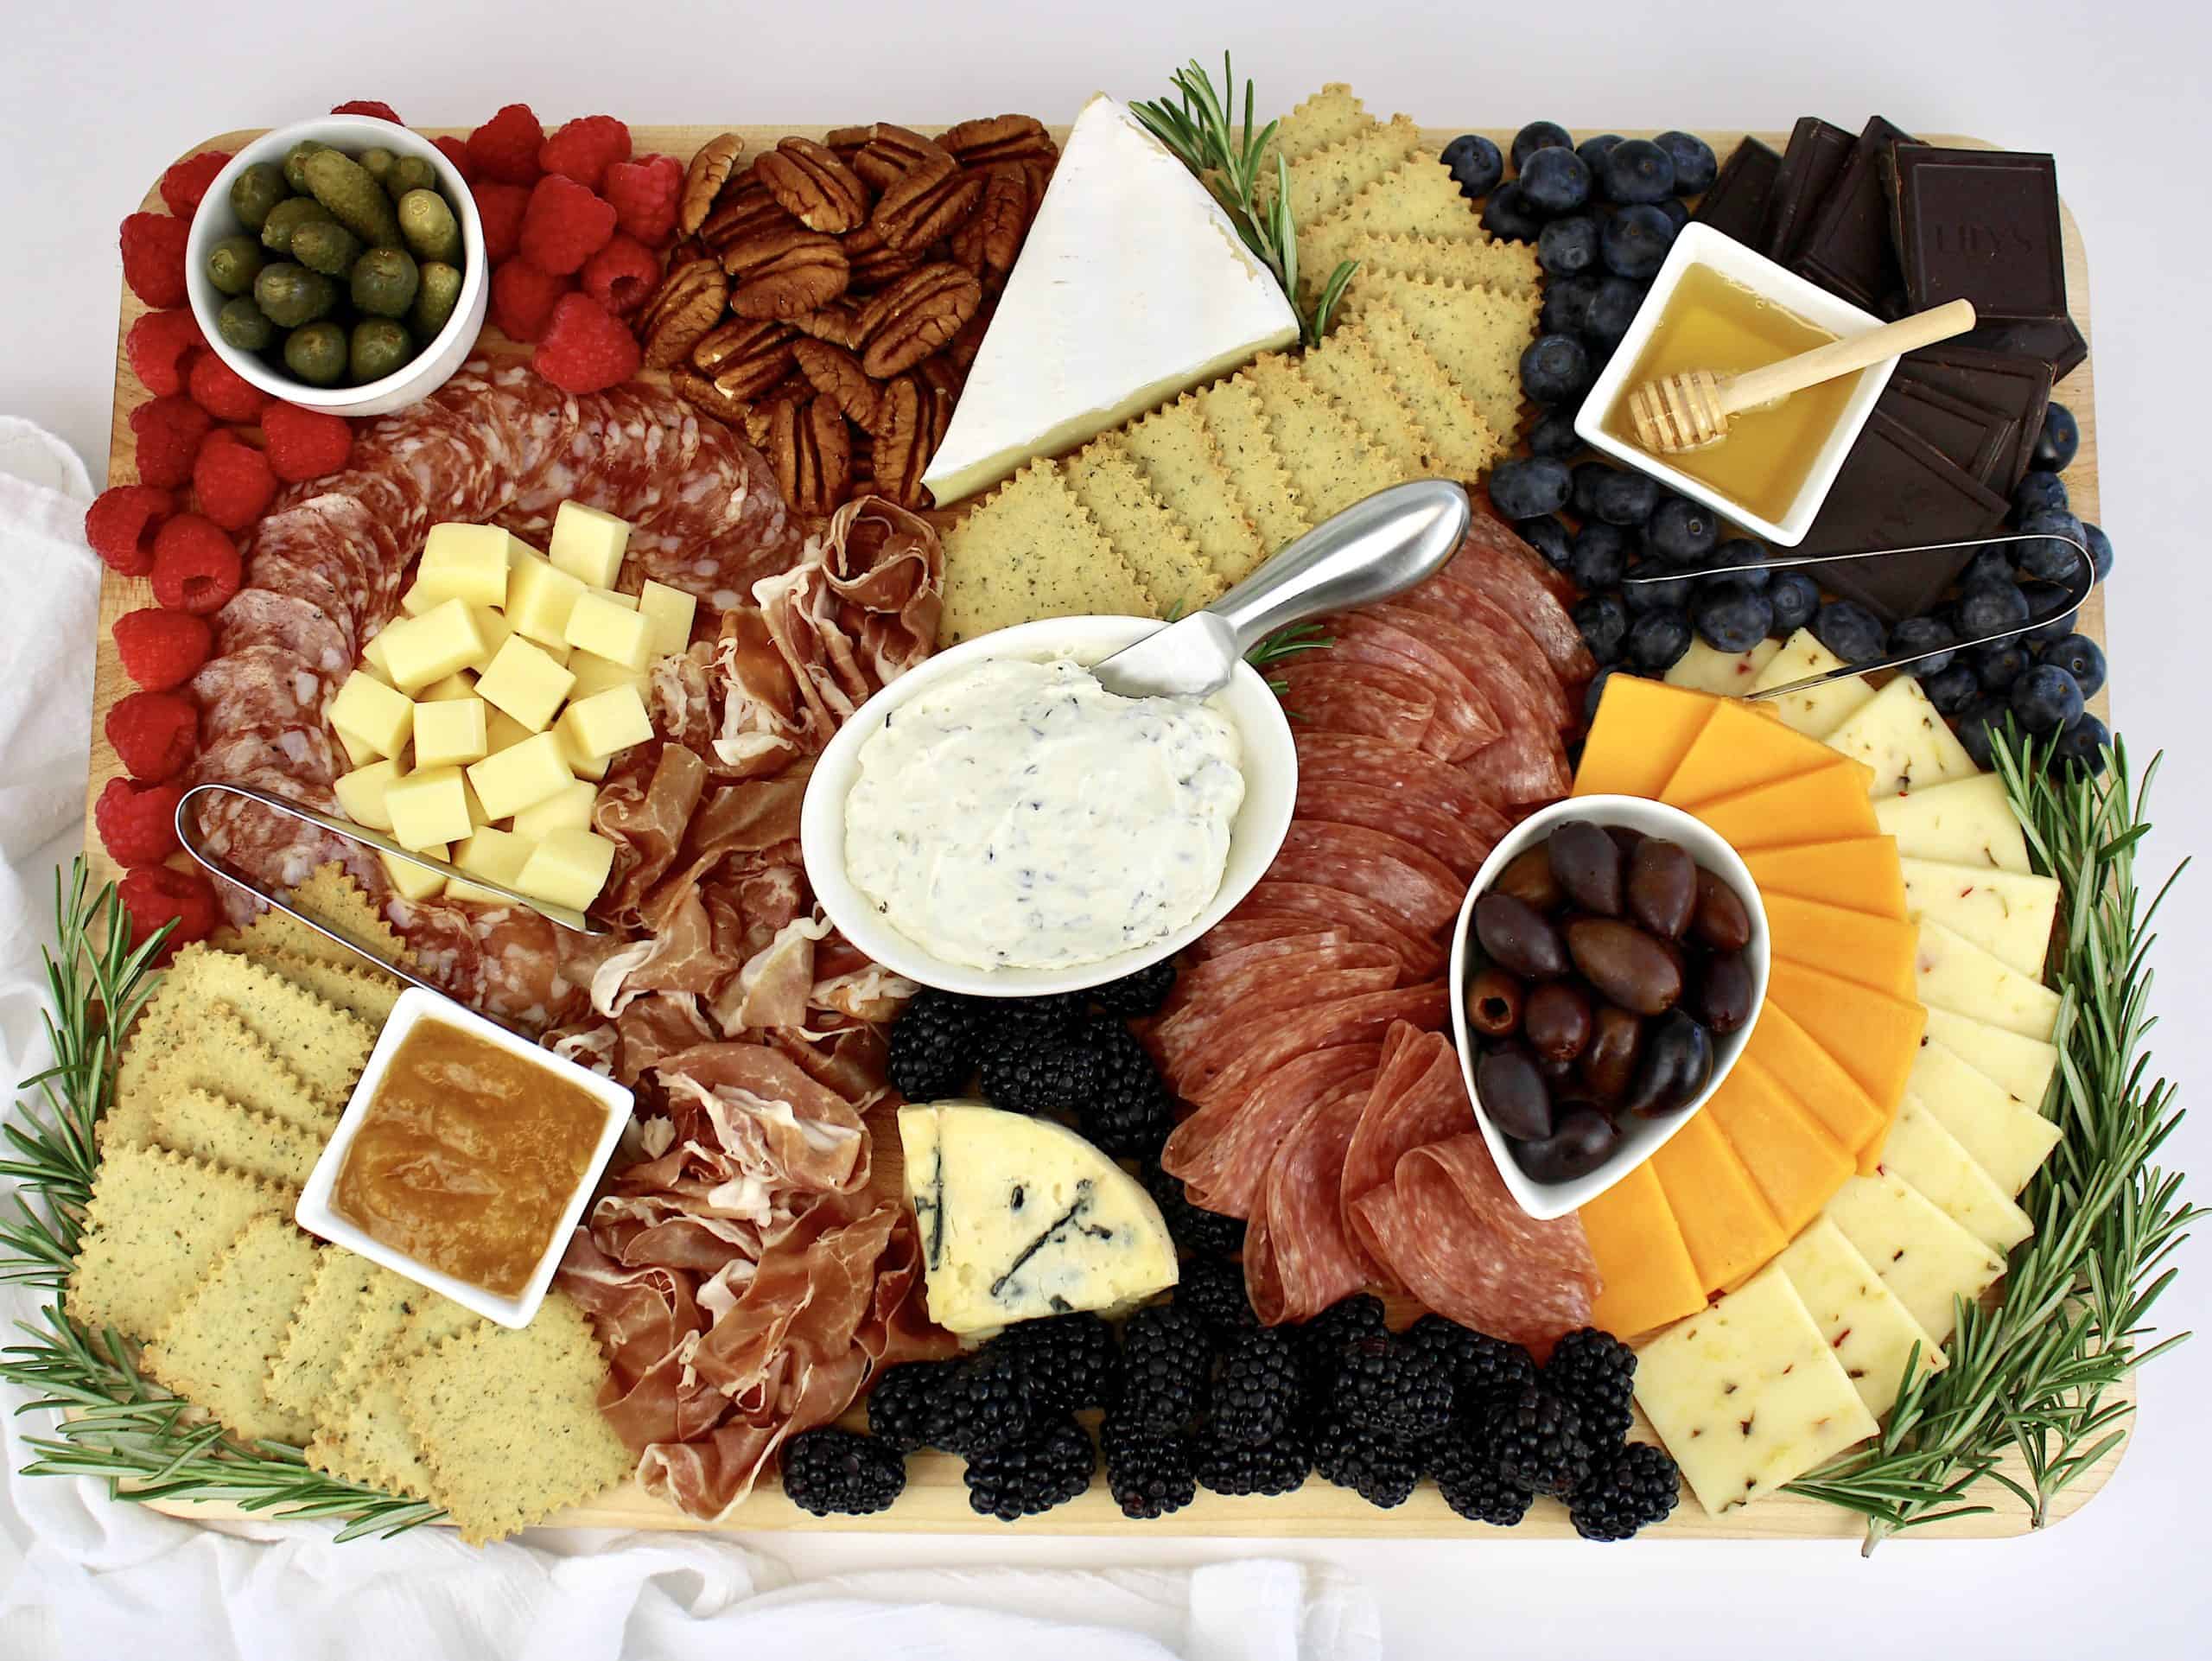 charcuterie board with meats cheeses berries